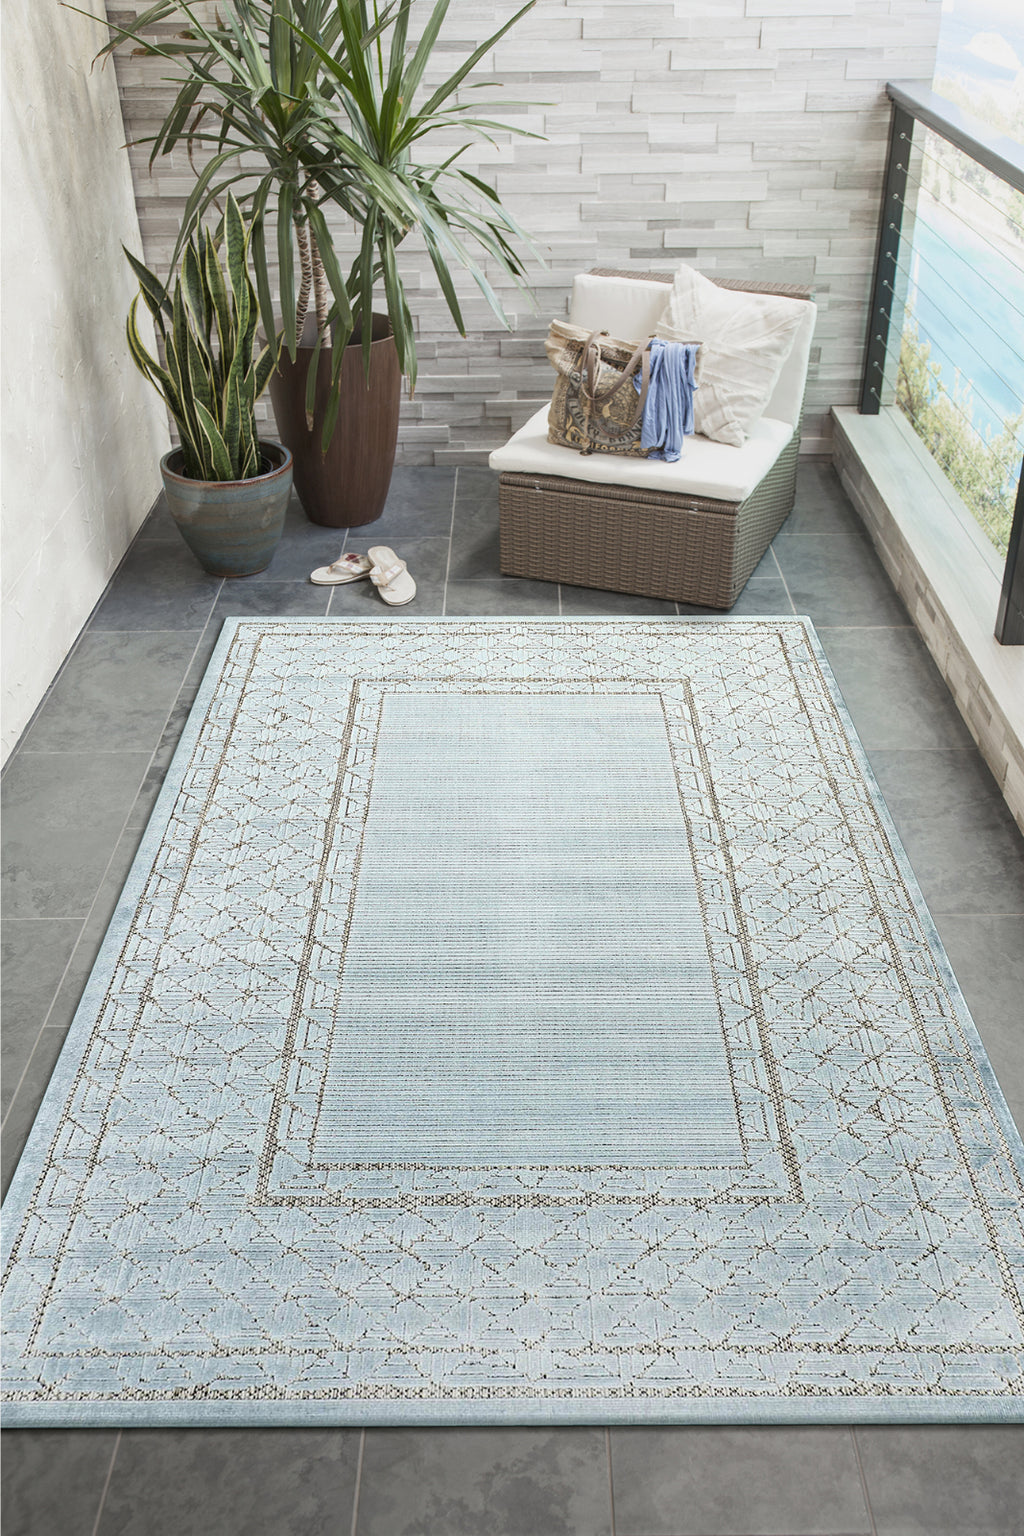 Trans Ocean Rialto 7040/04 Border Blue Area Rug by Liora Manne Room Scene Image Feature